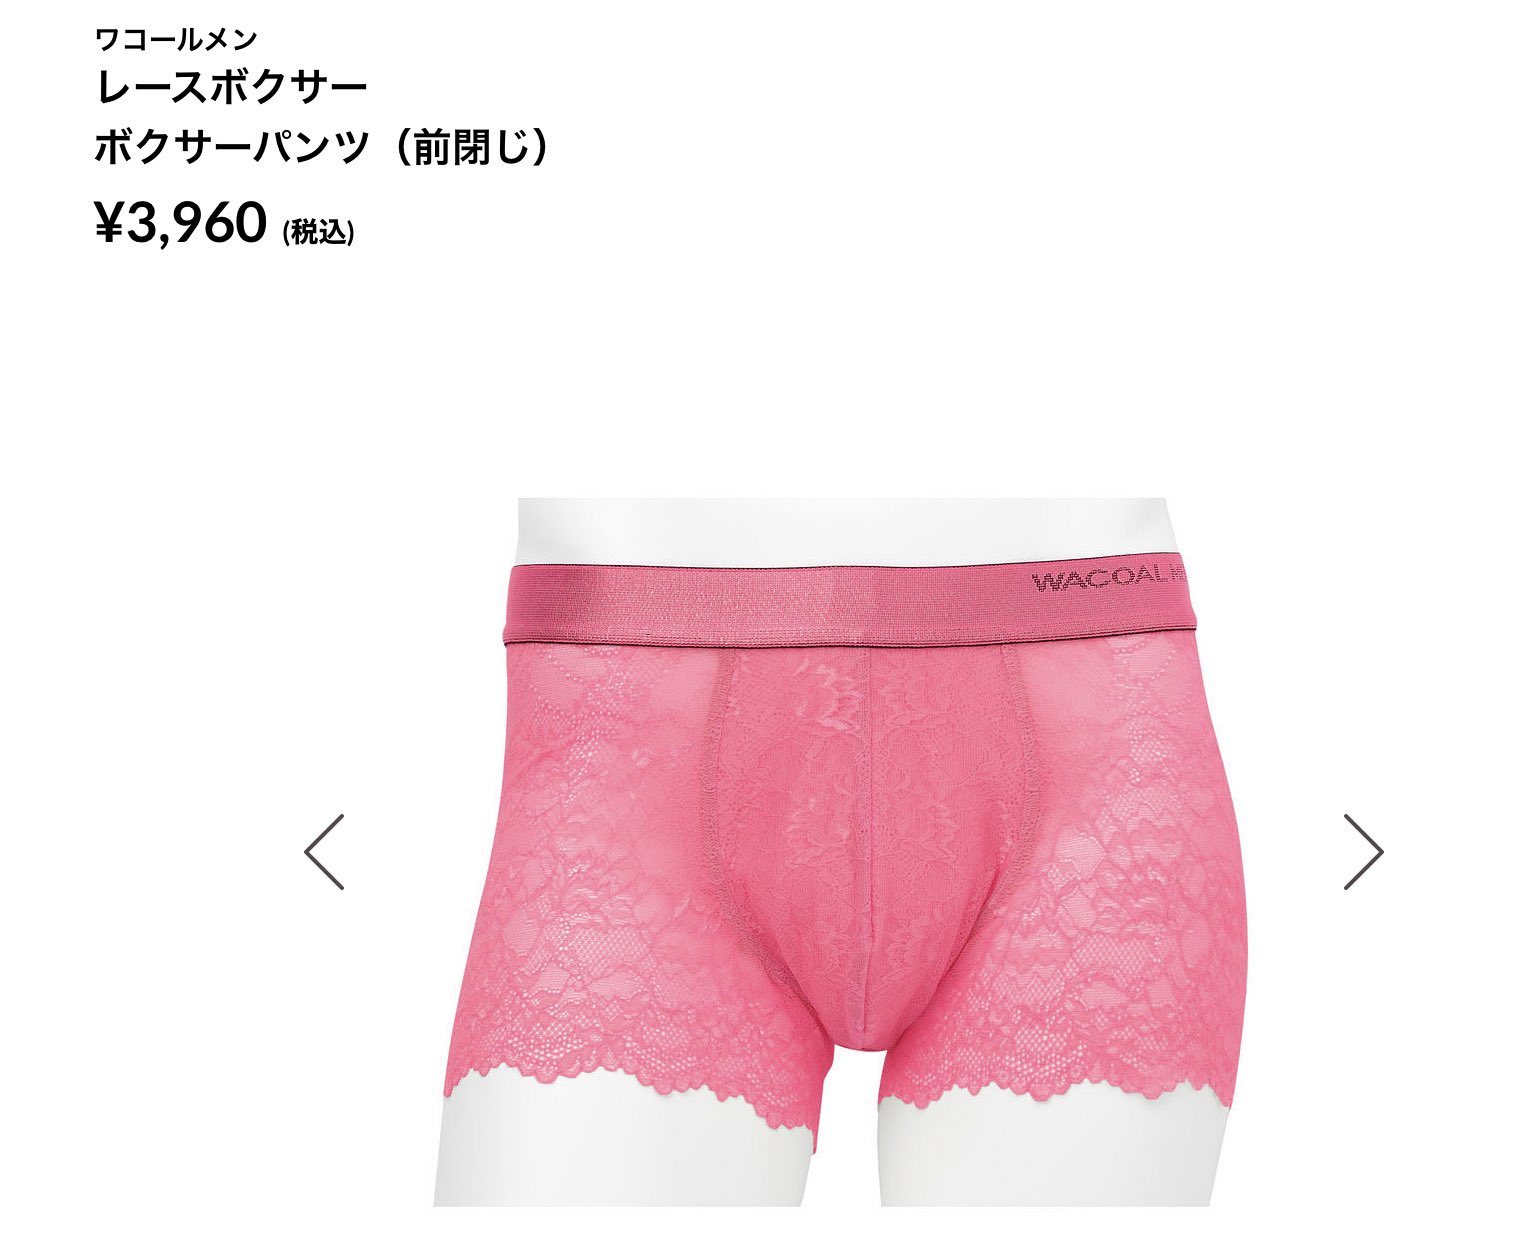 Jake Adelstein/中本哲史 on X: Just what we've all been waiting for in Japan:  the Wacoal Men's Lace Boxers. Comes with a coin purse! Lace is ace!  Unfortunately, pretty much sold out until